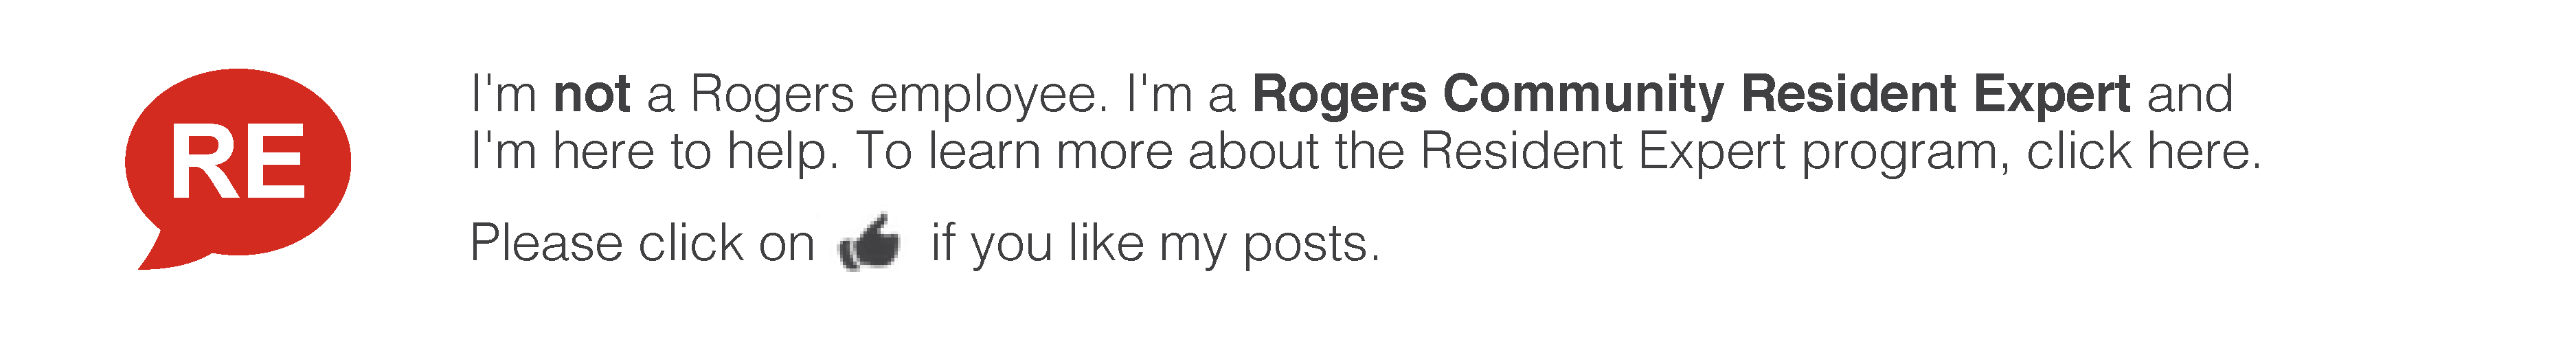 rogers-internet-promotions